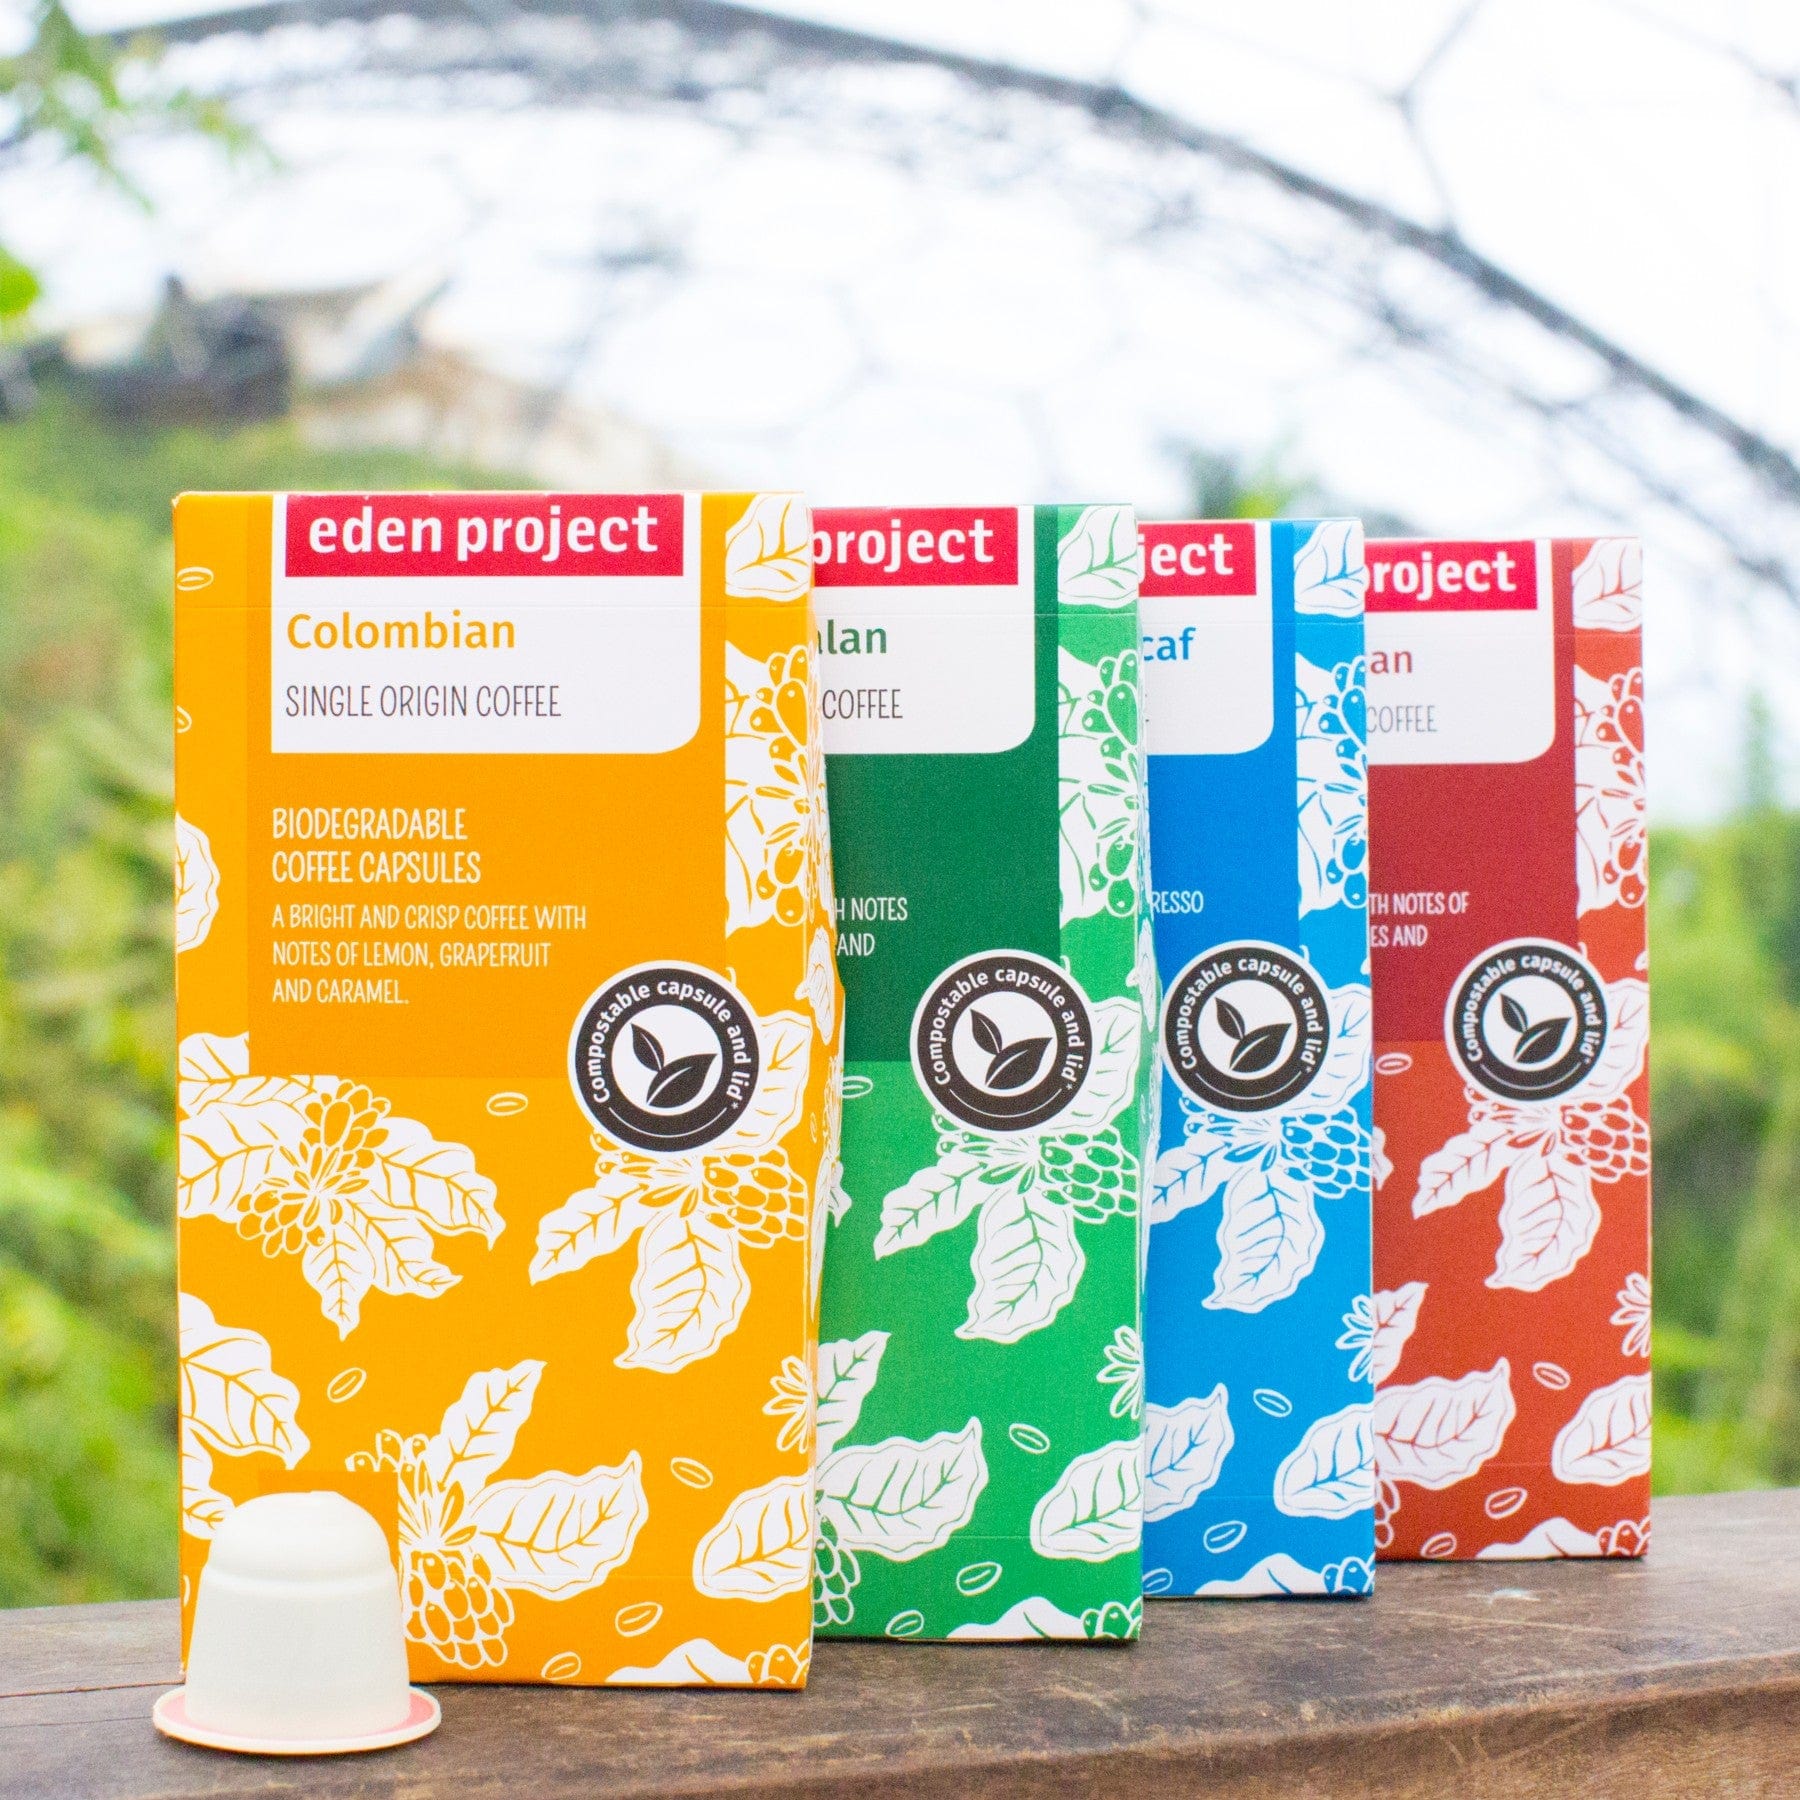 Four colorful boxes of Eden Project biodegradable coffee capsules in Colombian, Italian, Decaf, and Organic varieties displayed outdoors with a coffee pod in front